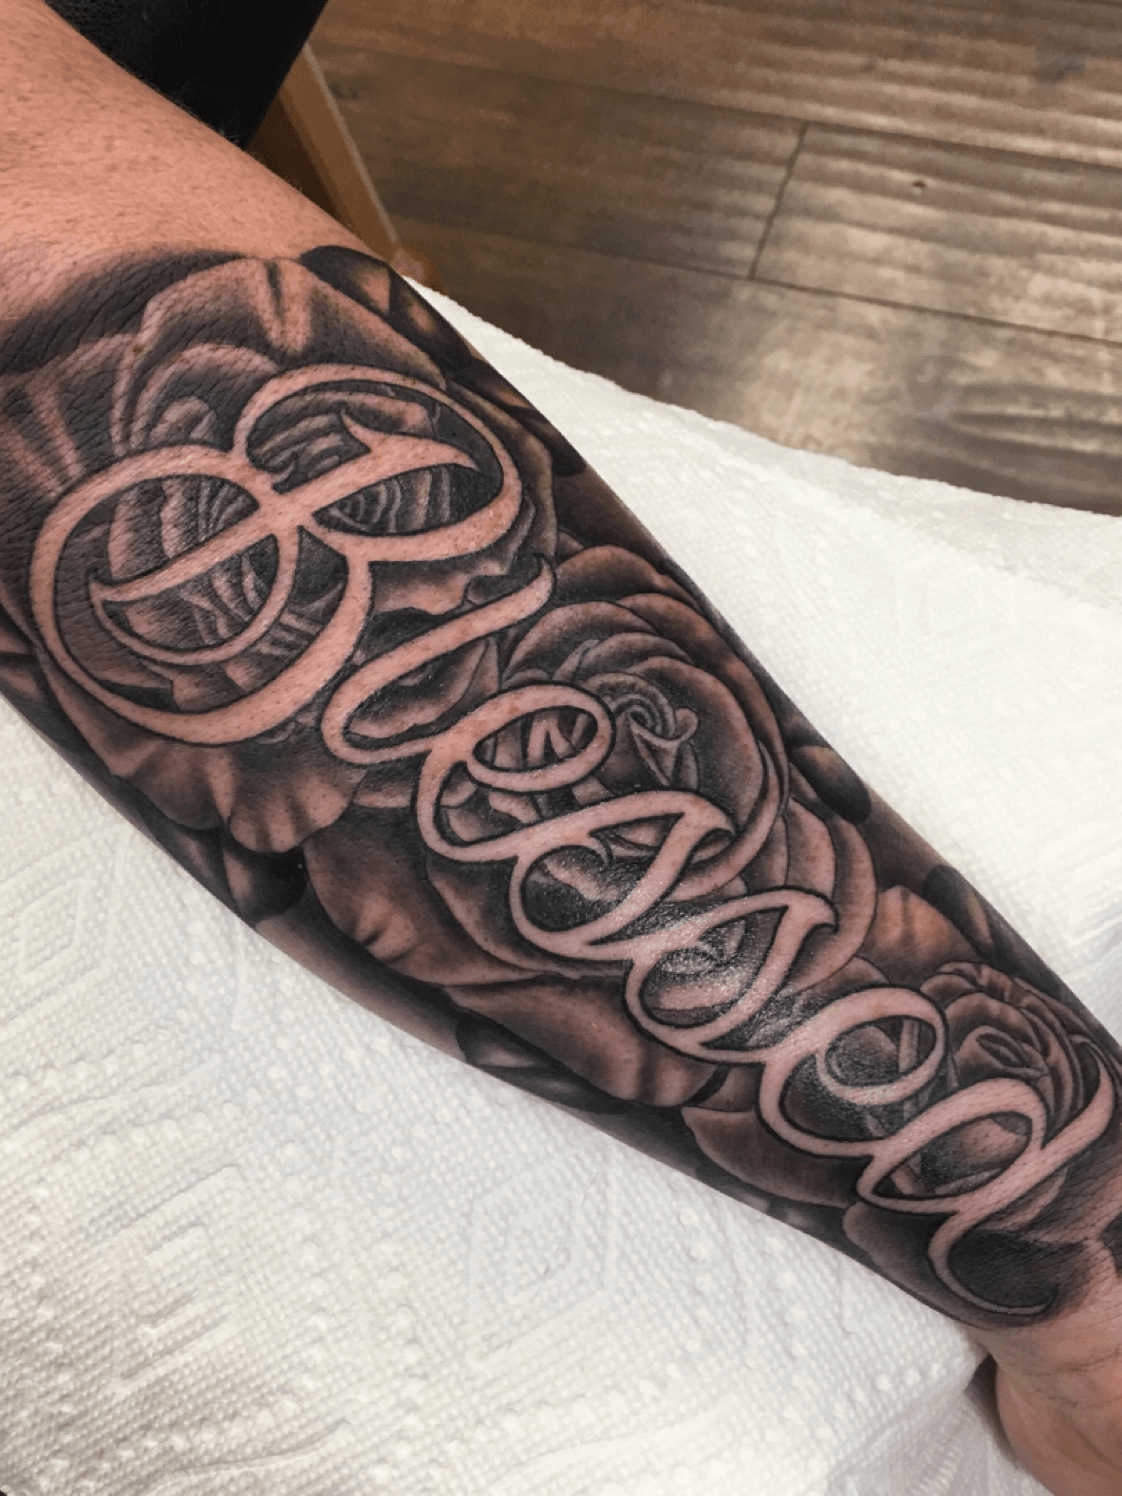 Black shaded simple blessed tattoo on full forearm for men